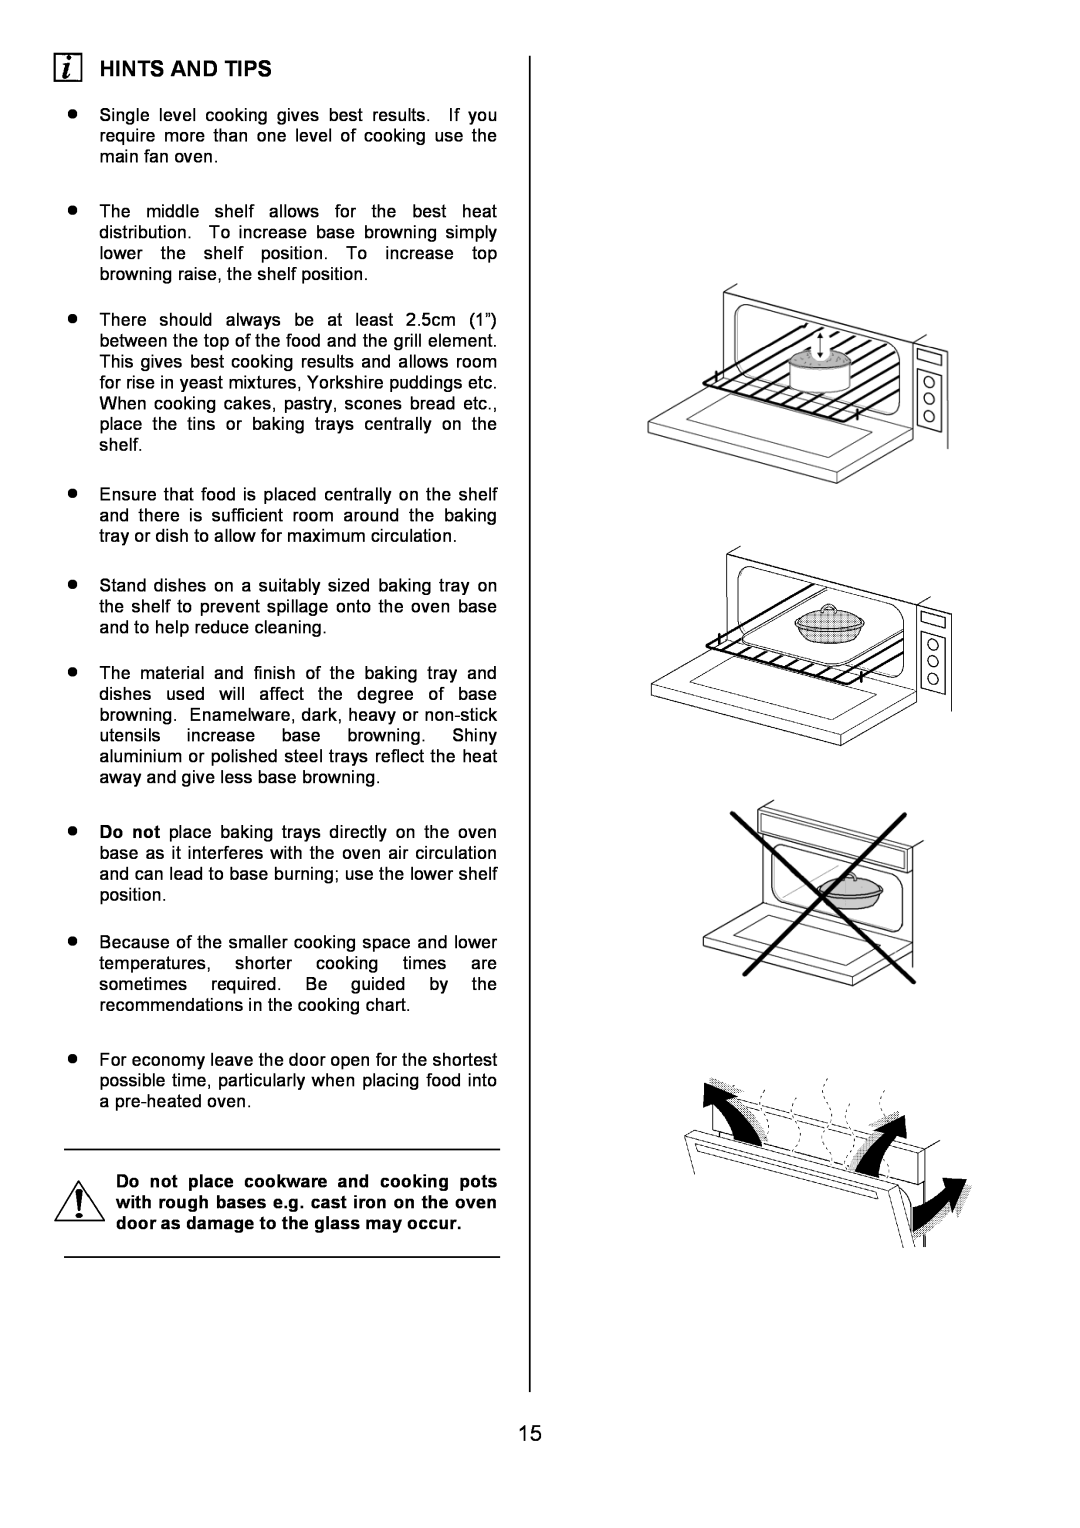 Electrolux U3100-4 manual Hints And Tips 